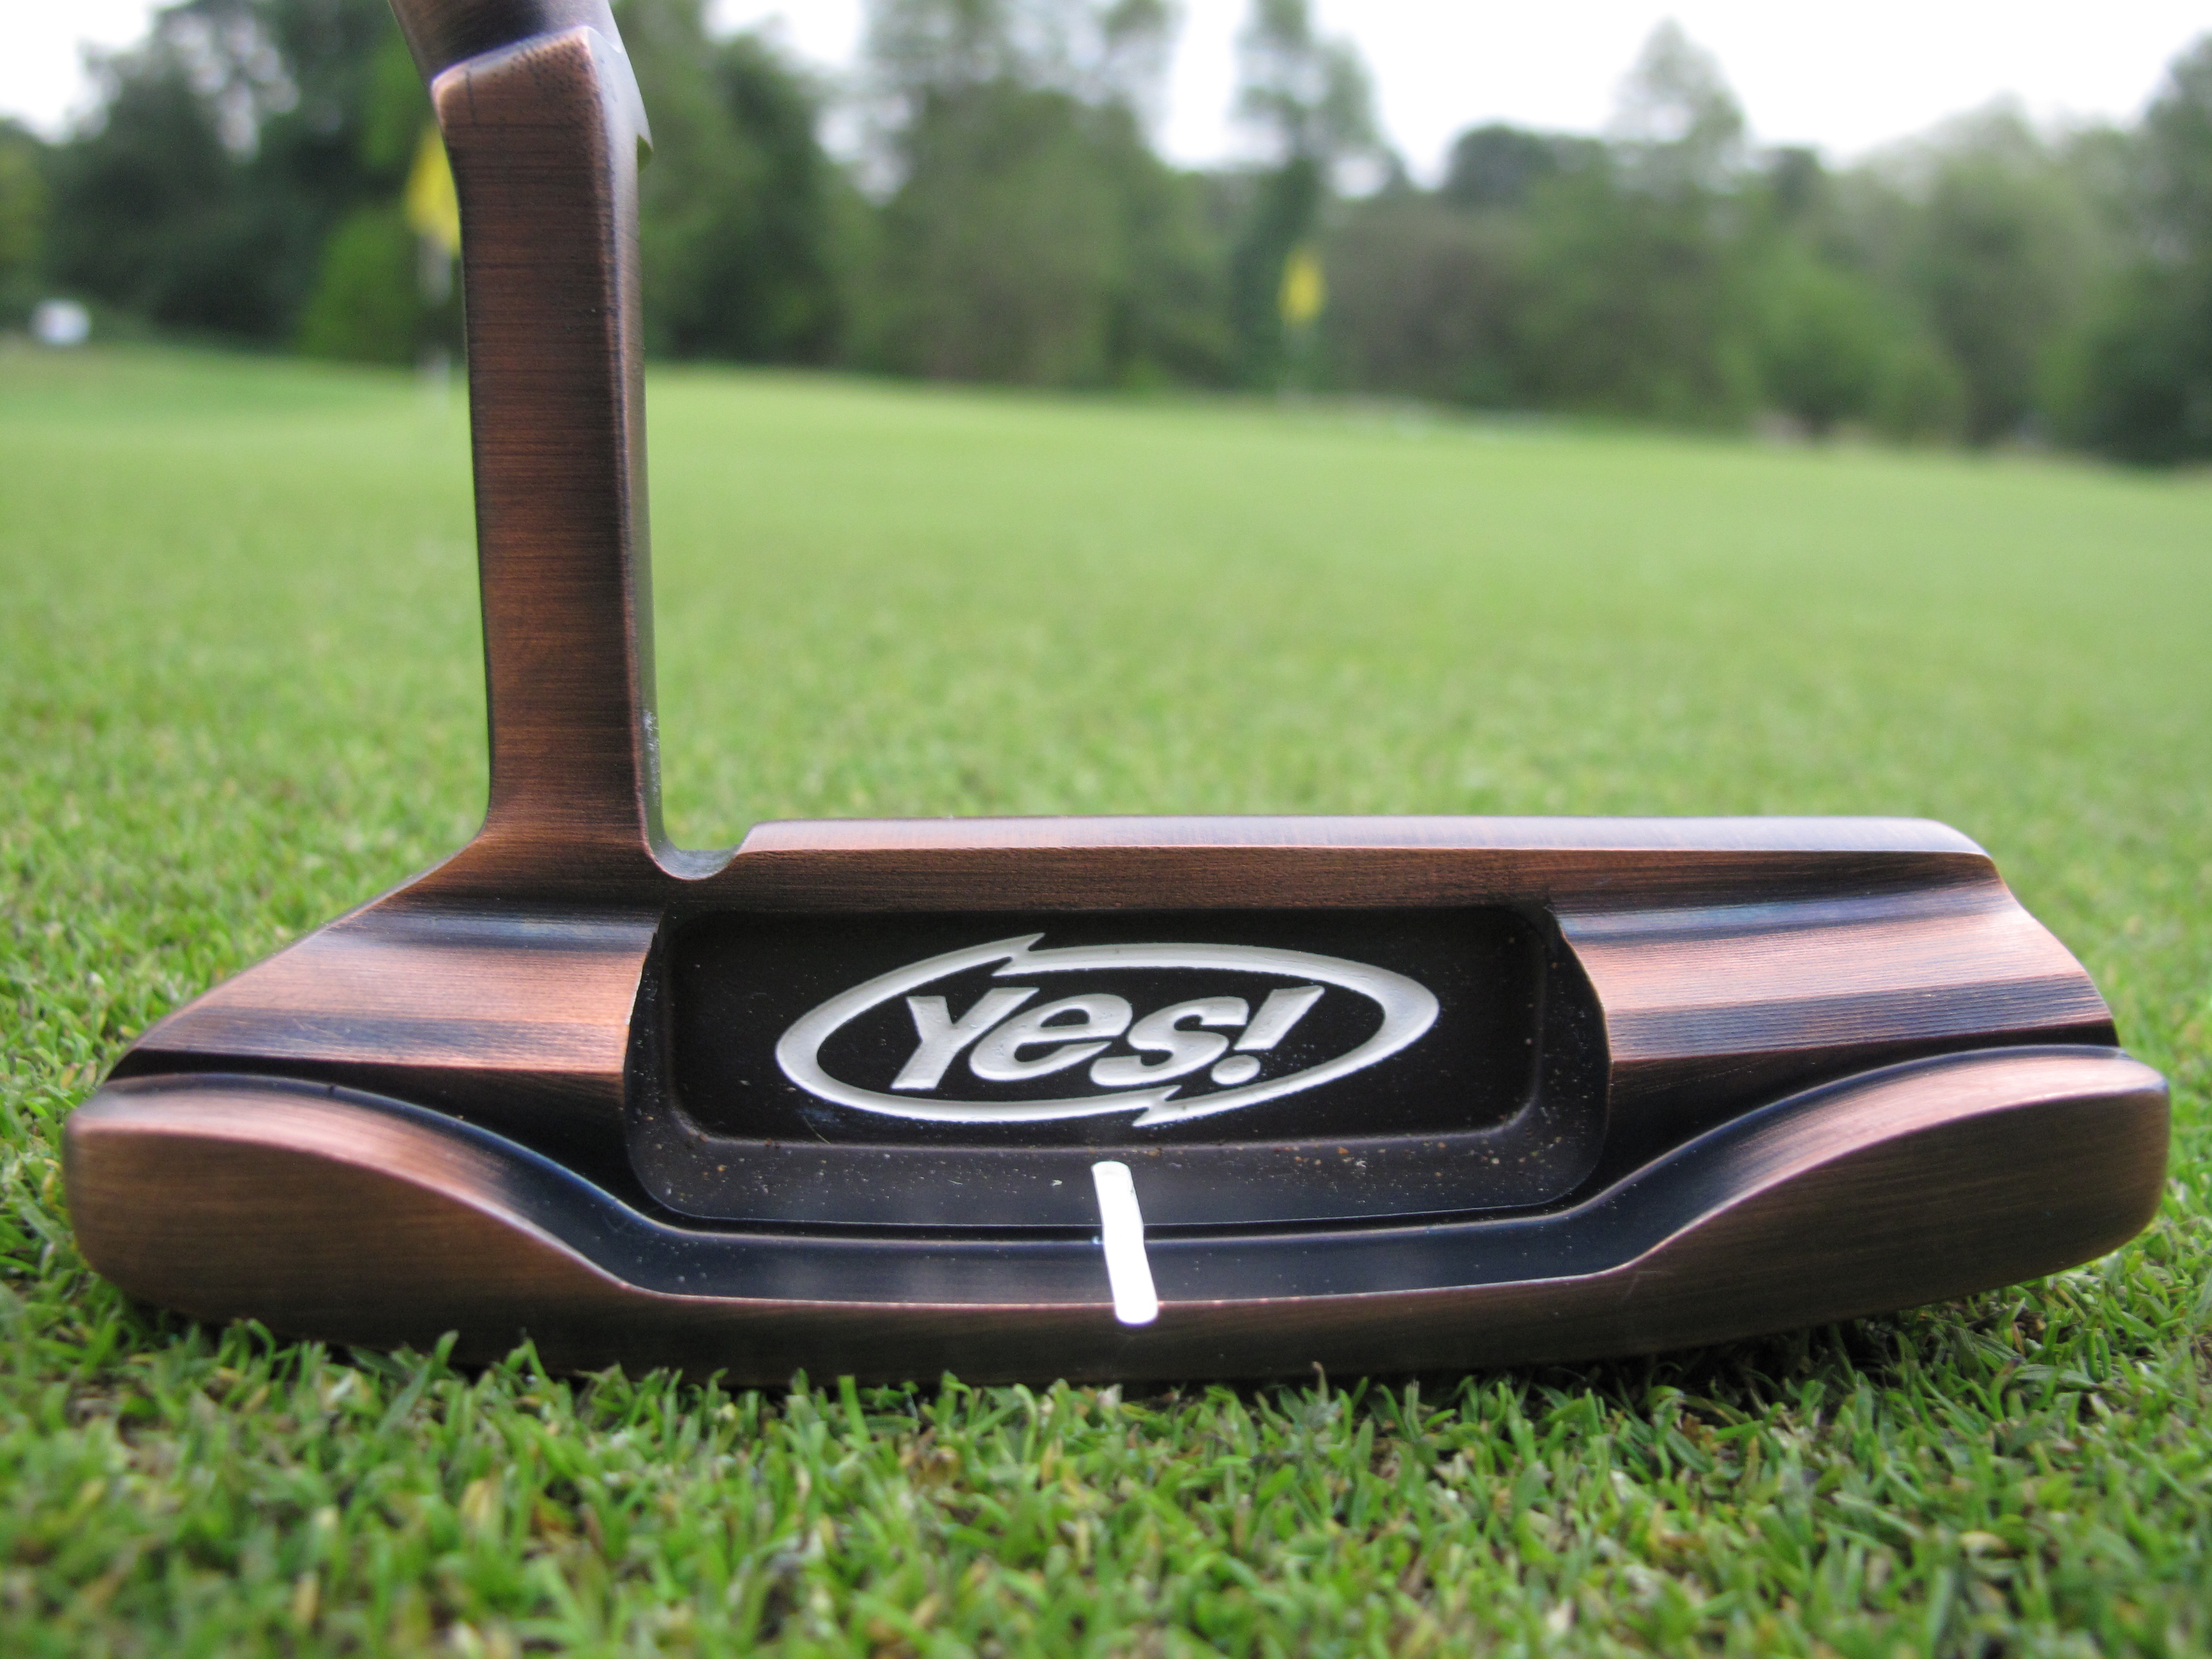 Review: Yes! i4-Tech Callie putter